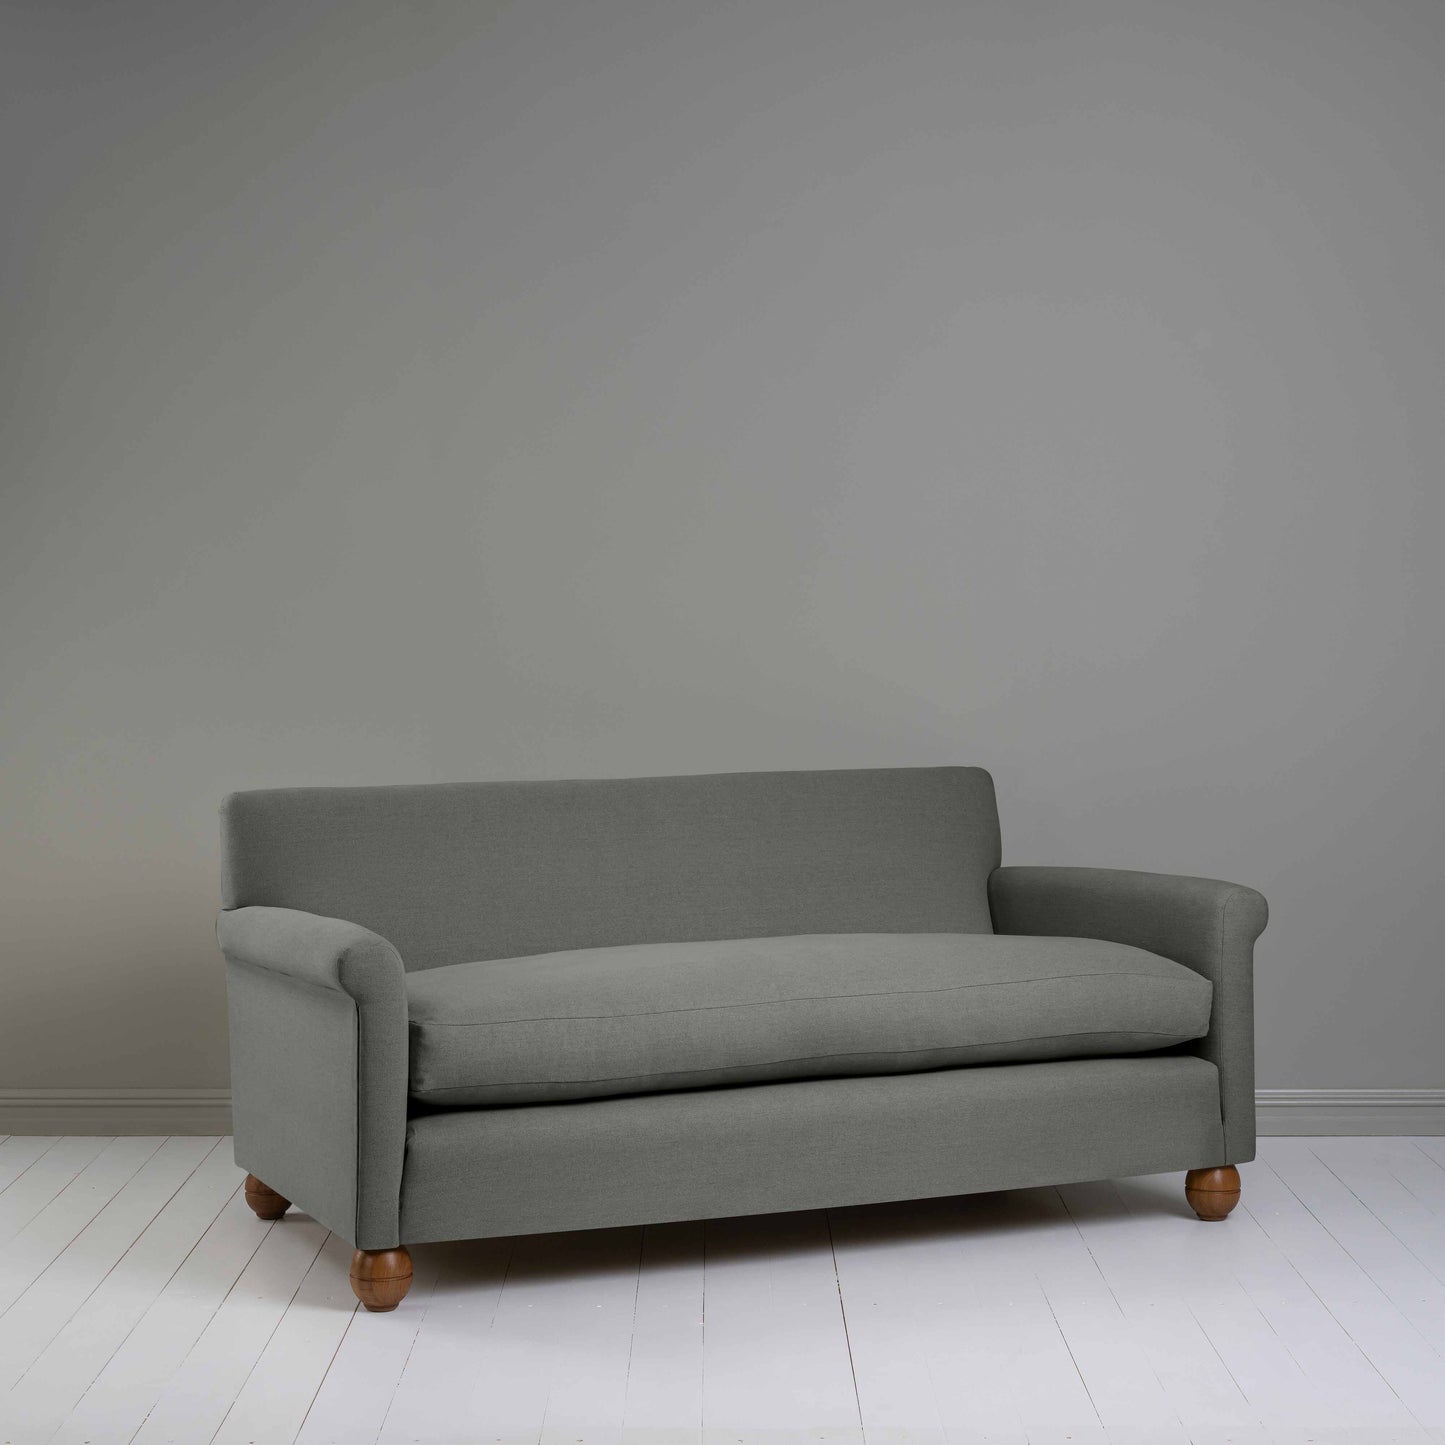 Idler 3 Seater Sofa in Laidback Linen Shadow